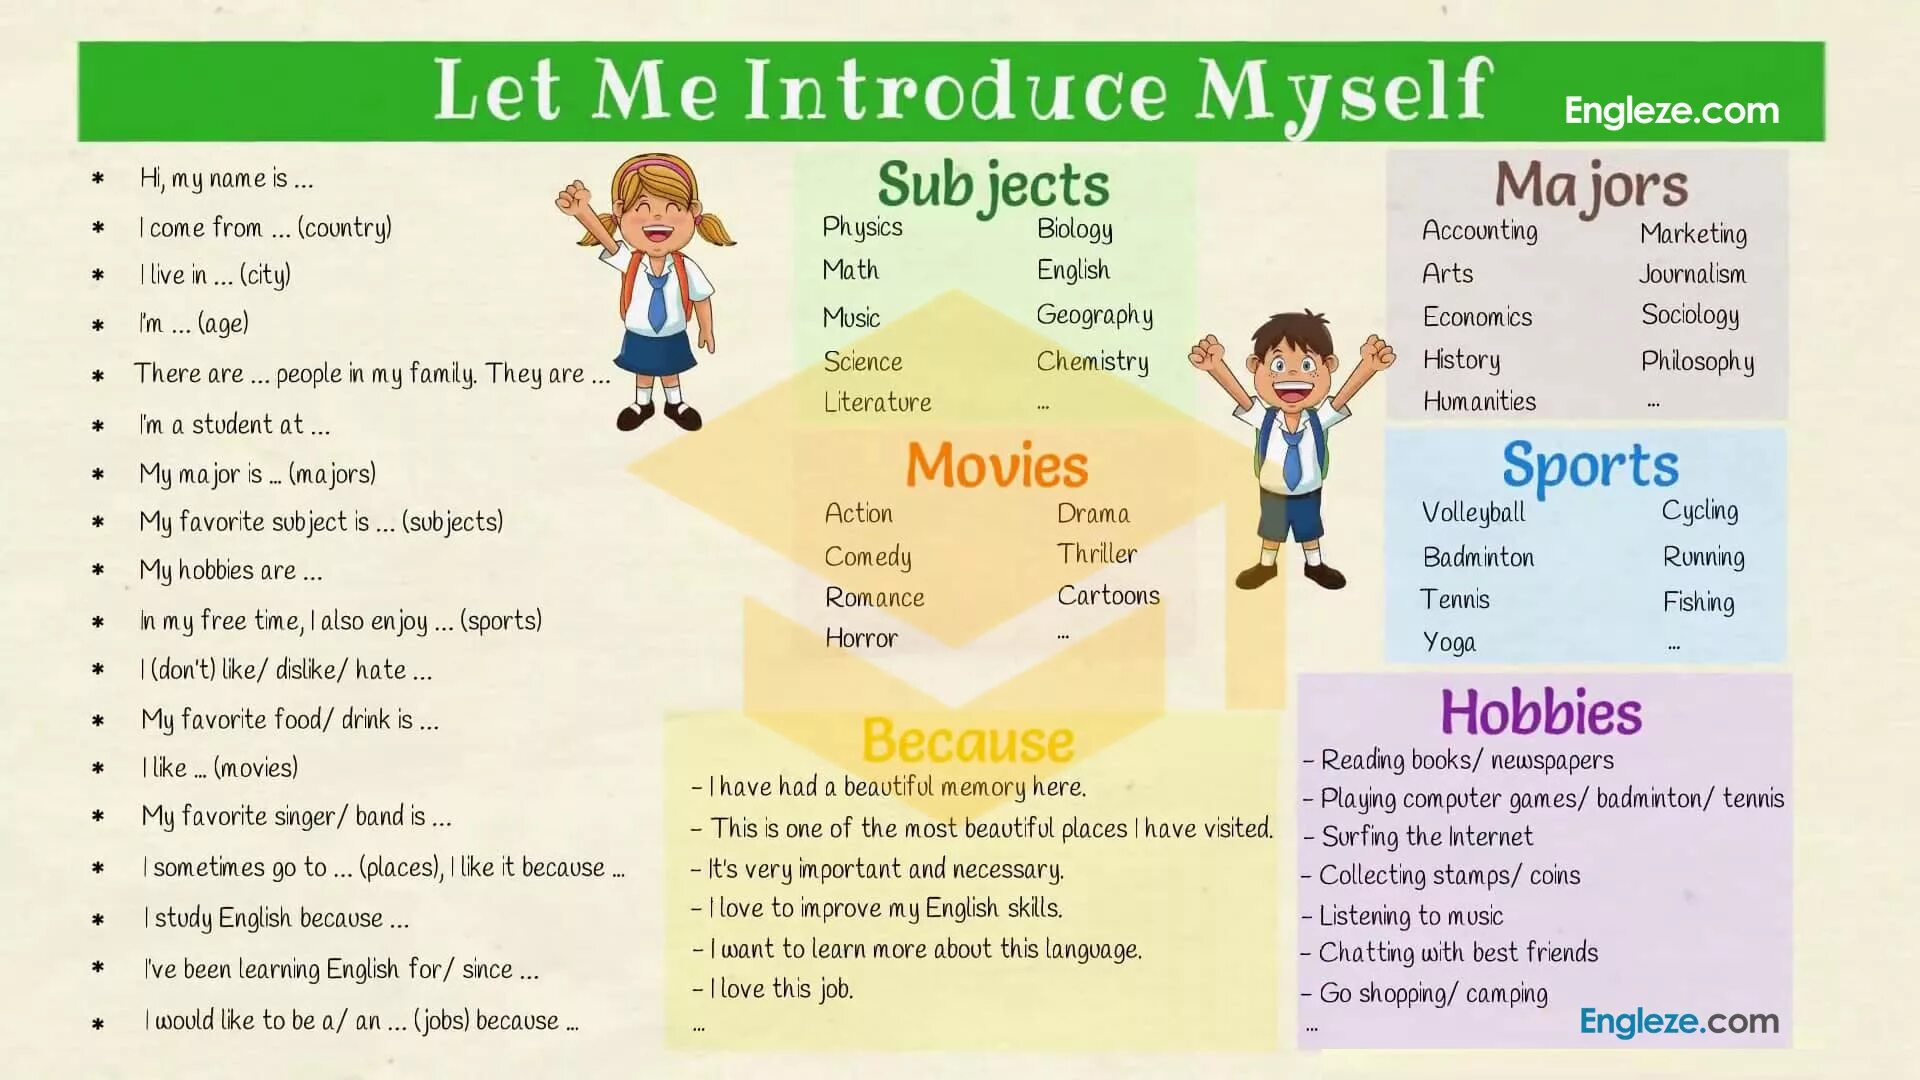 To do one s best. Урок английского языка. How to introduce yourself in English. Английский introduce yourself. About myself английском языке.